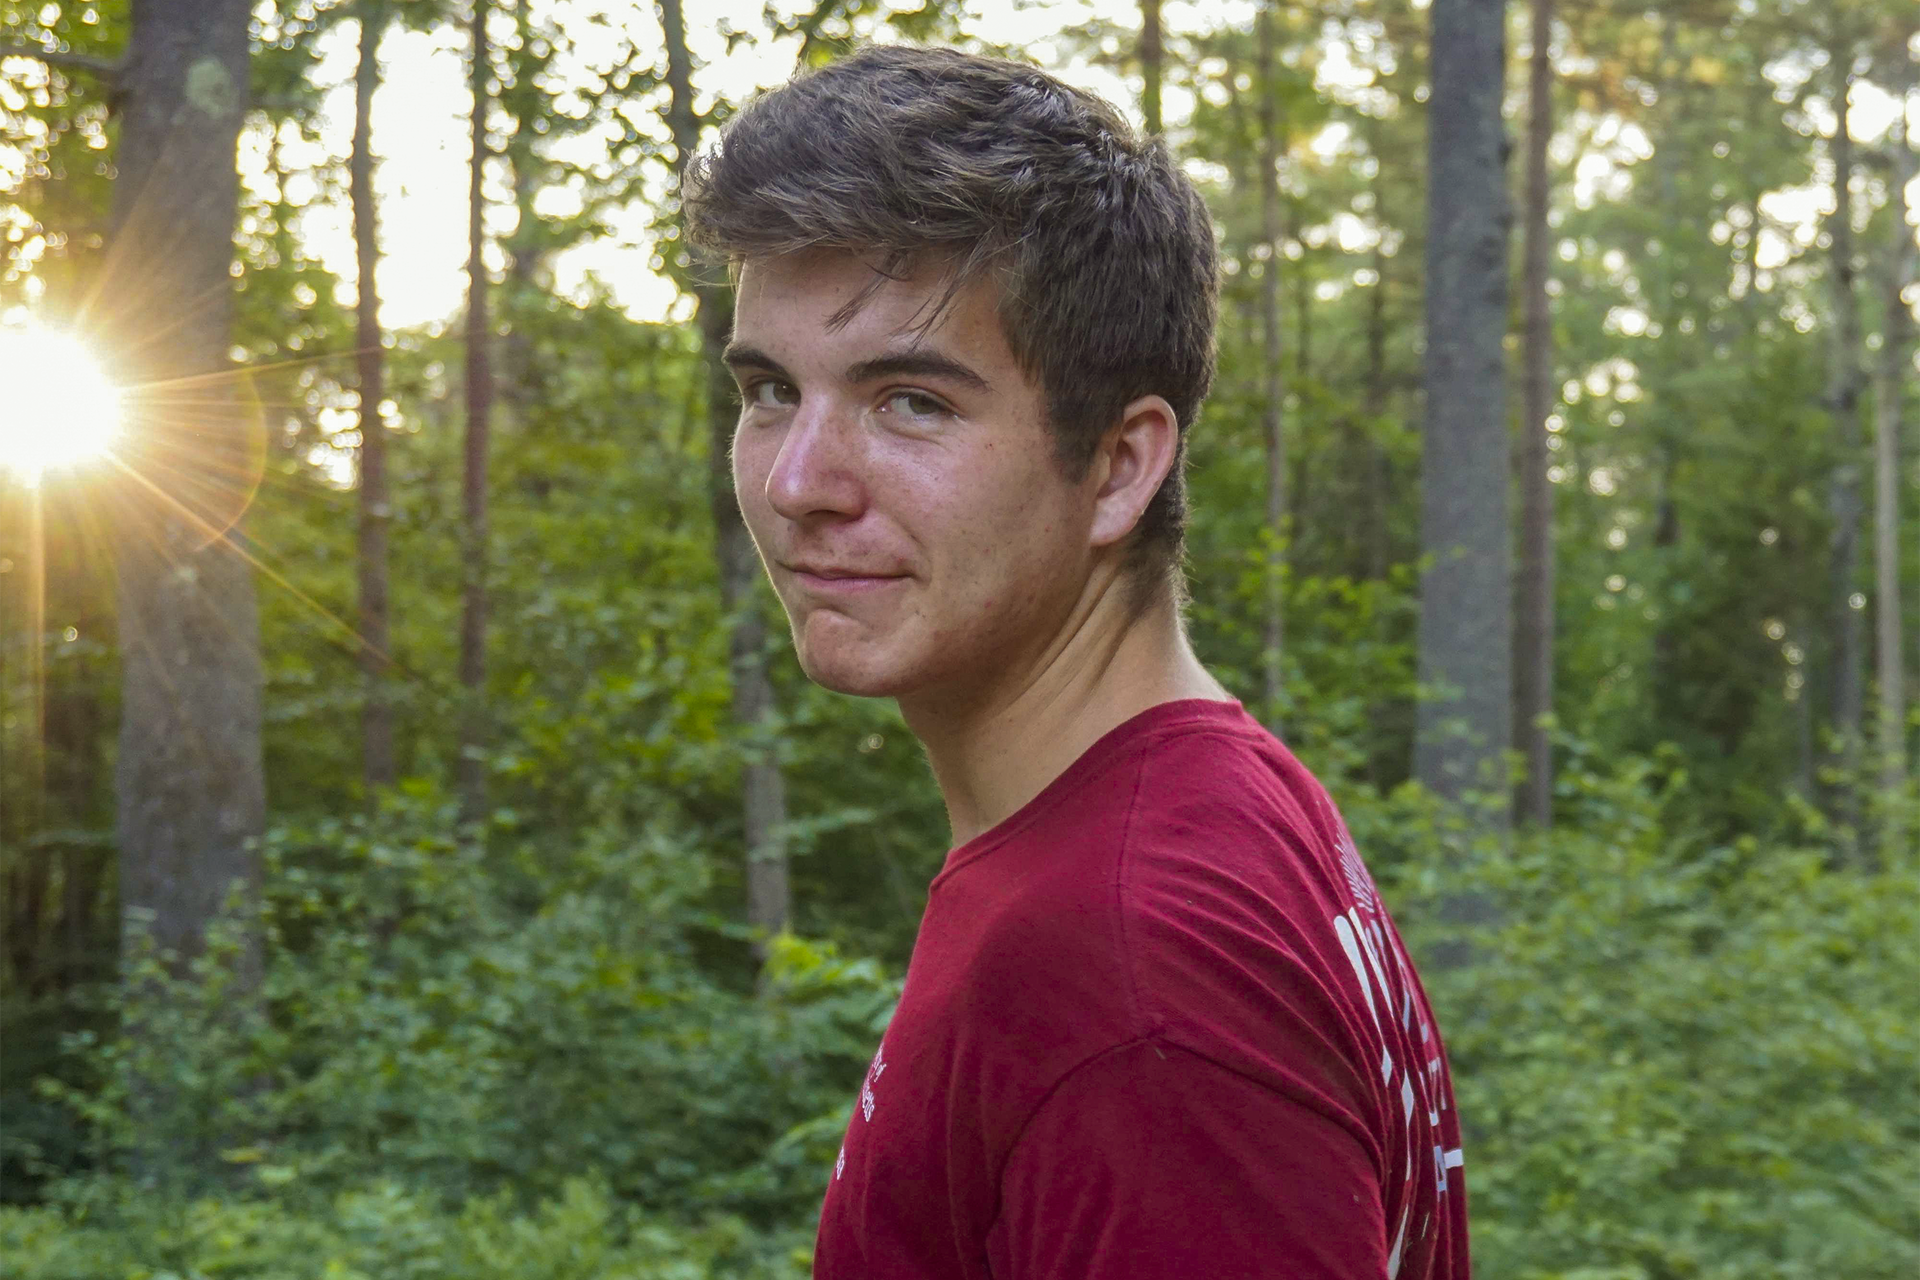 Brunette boy smiling at the camera in a red shirt. The sun filters through the trees in the background.